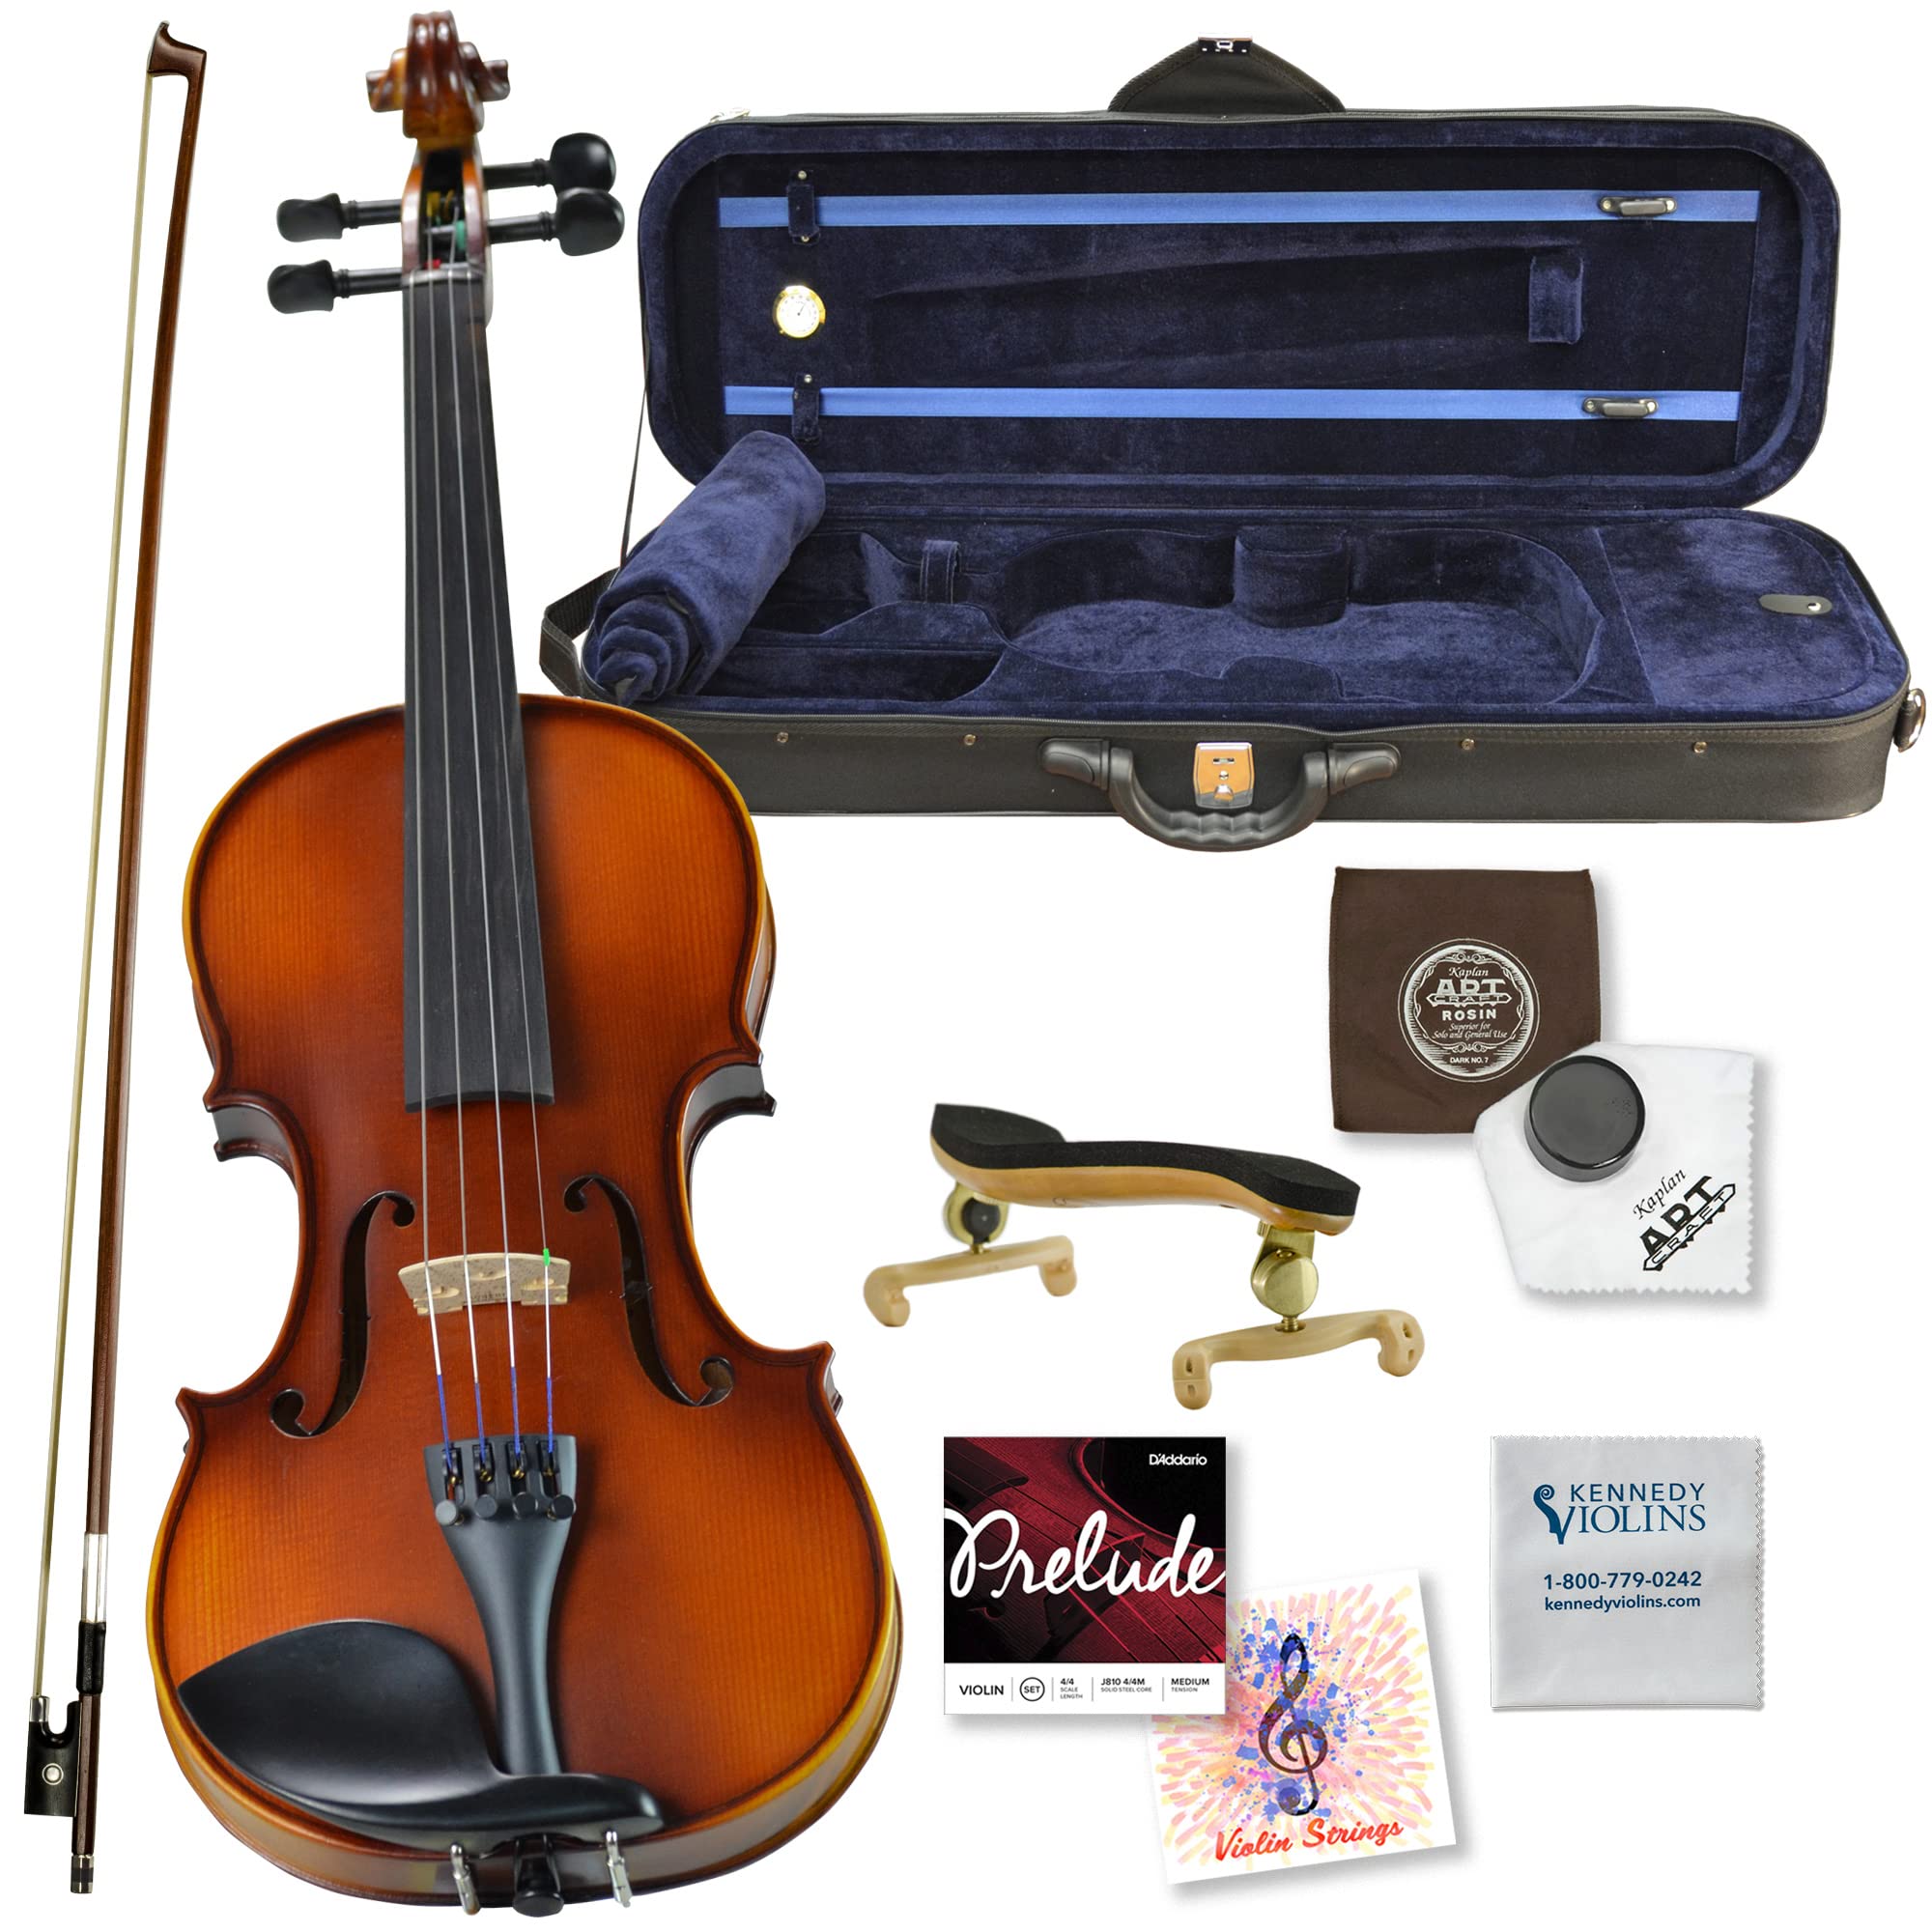 Kennedy Violins Bunnel G1 Violin Outfit 12 Size - Carrying Case And Accessories Included - Solid Maple Wood And Ebony Fittings By Kennedy Violin